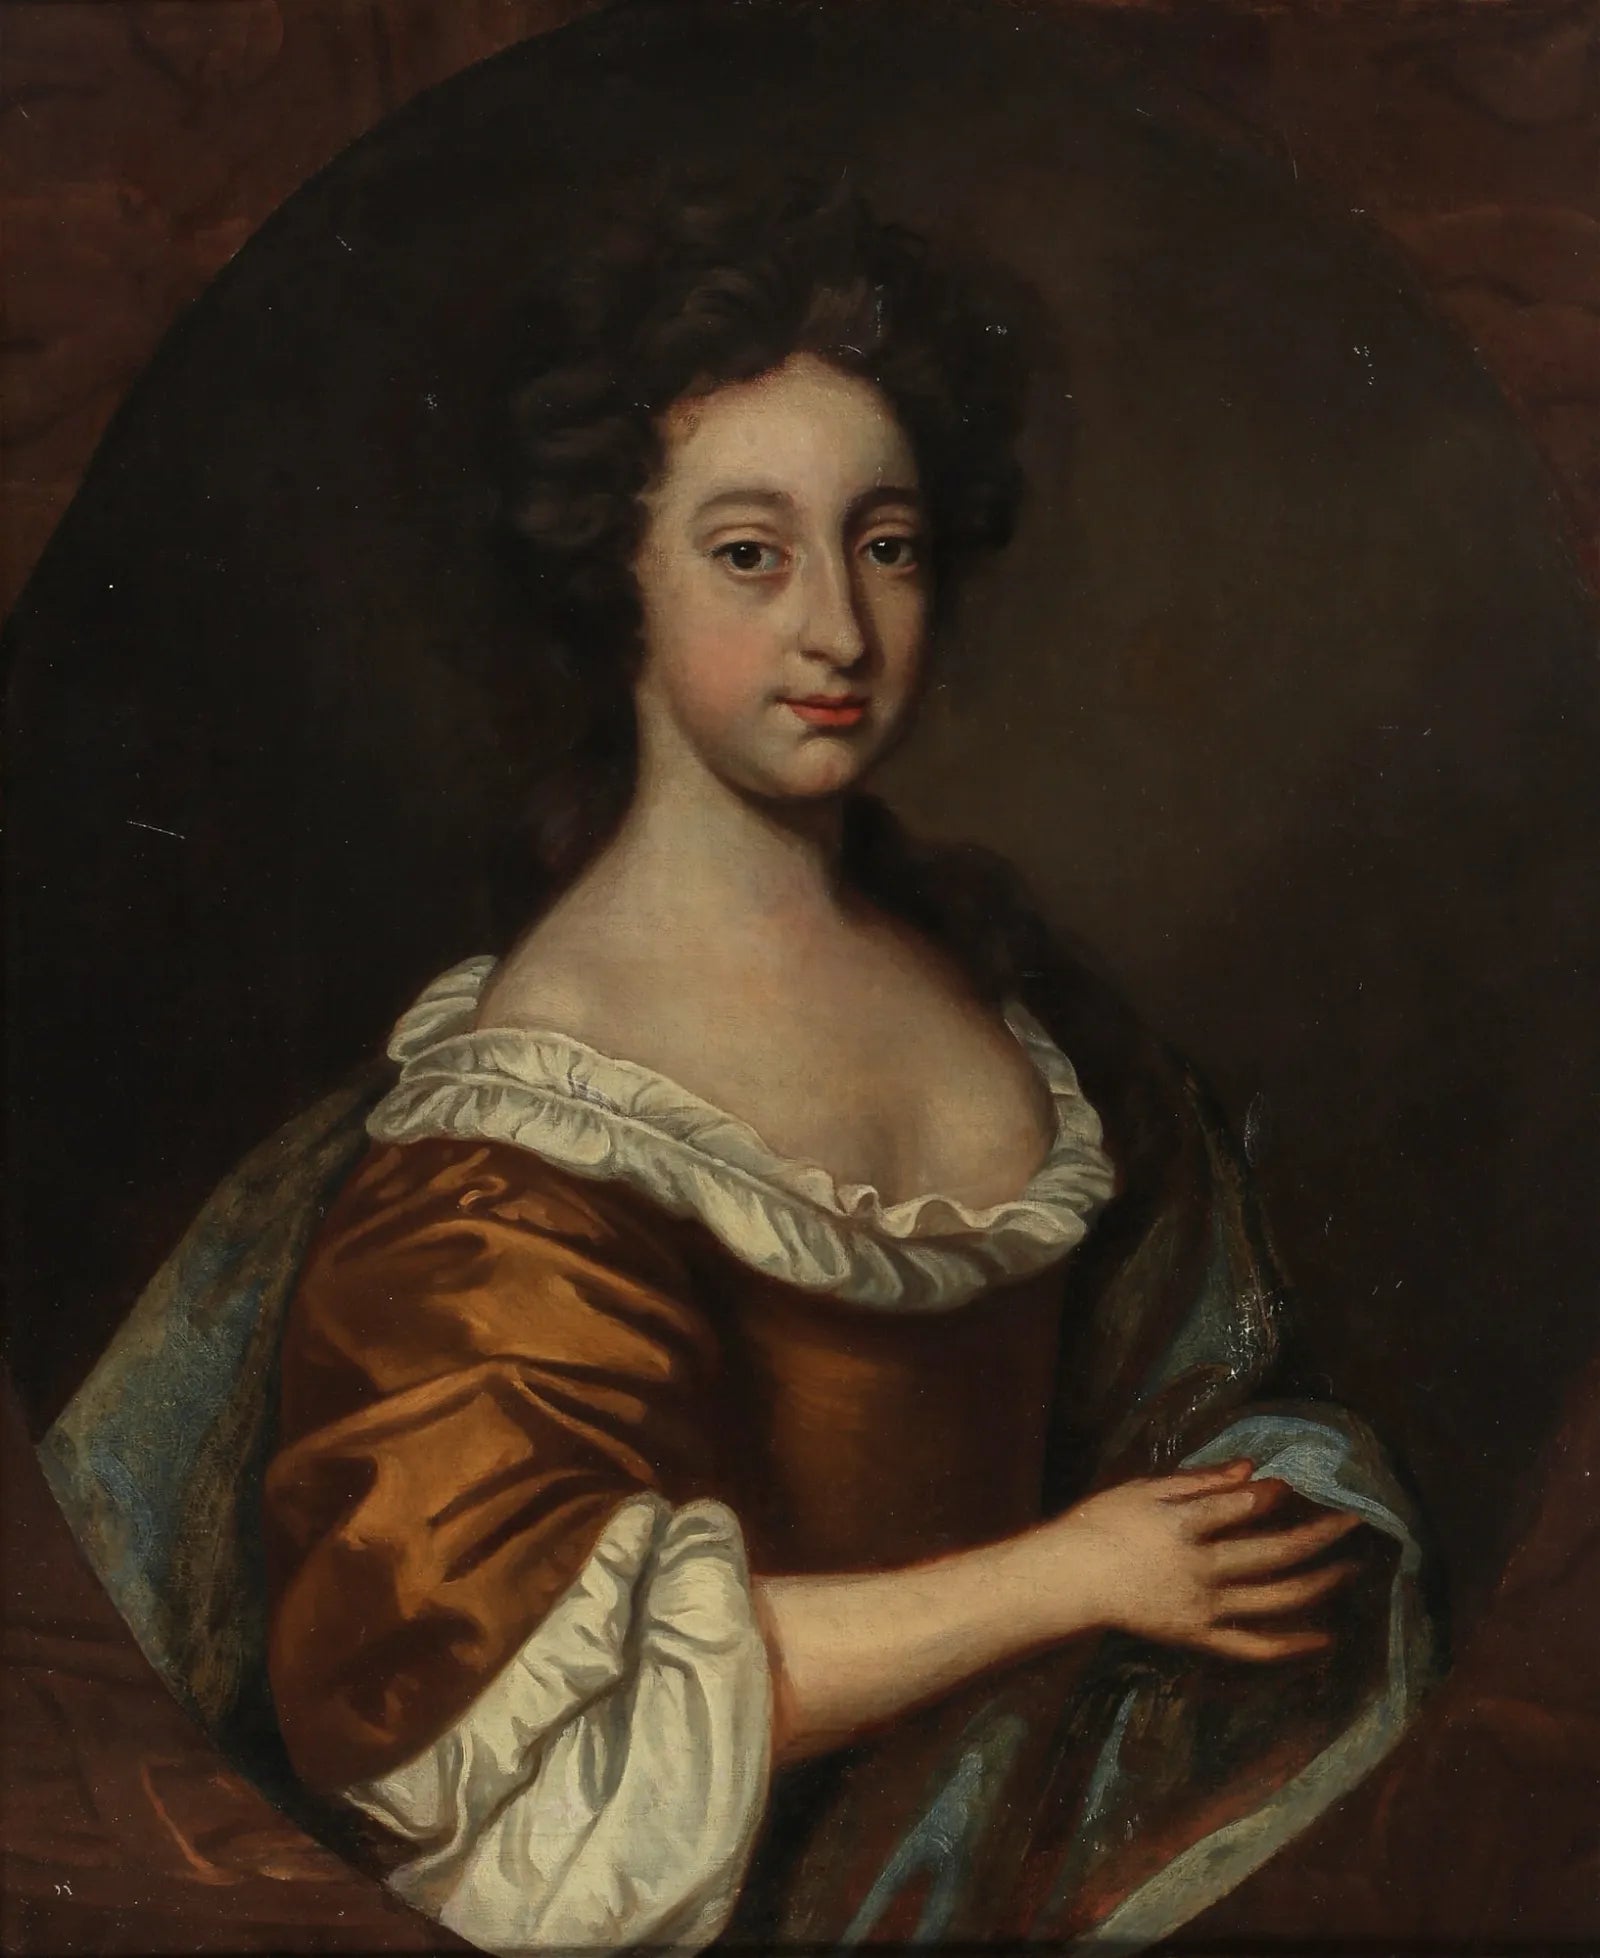 AW026 - French School - 18th Century Portrait of a Lady